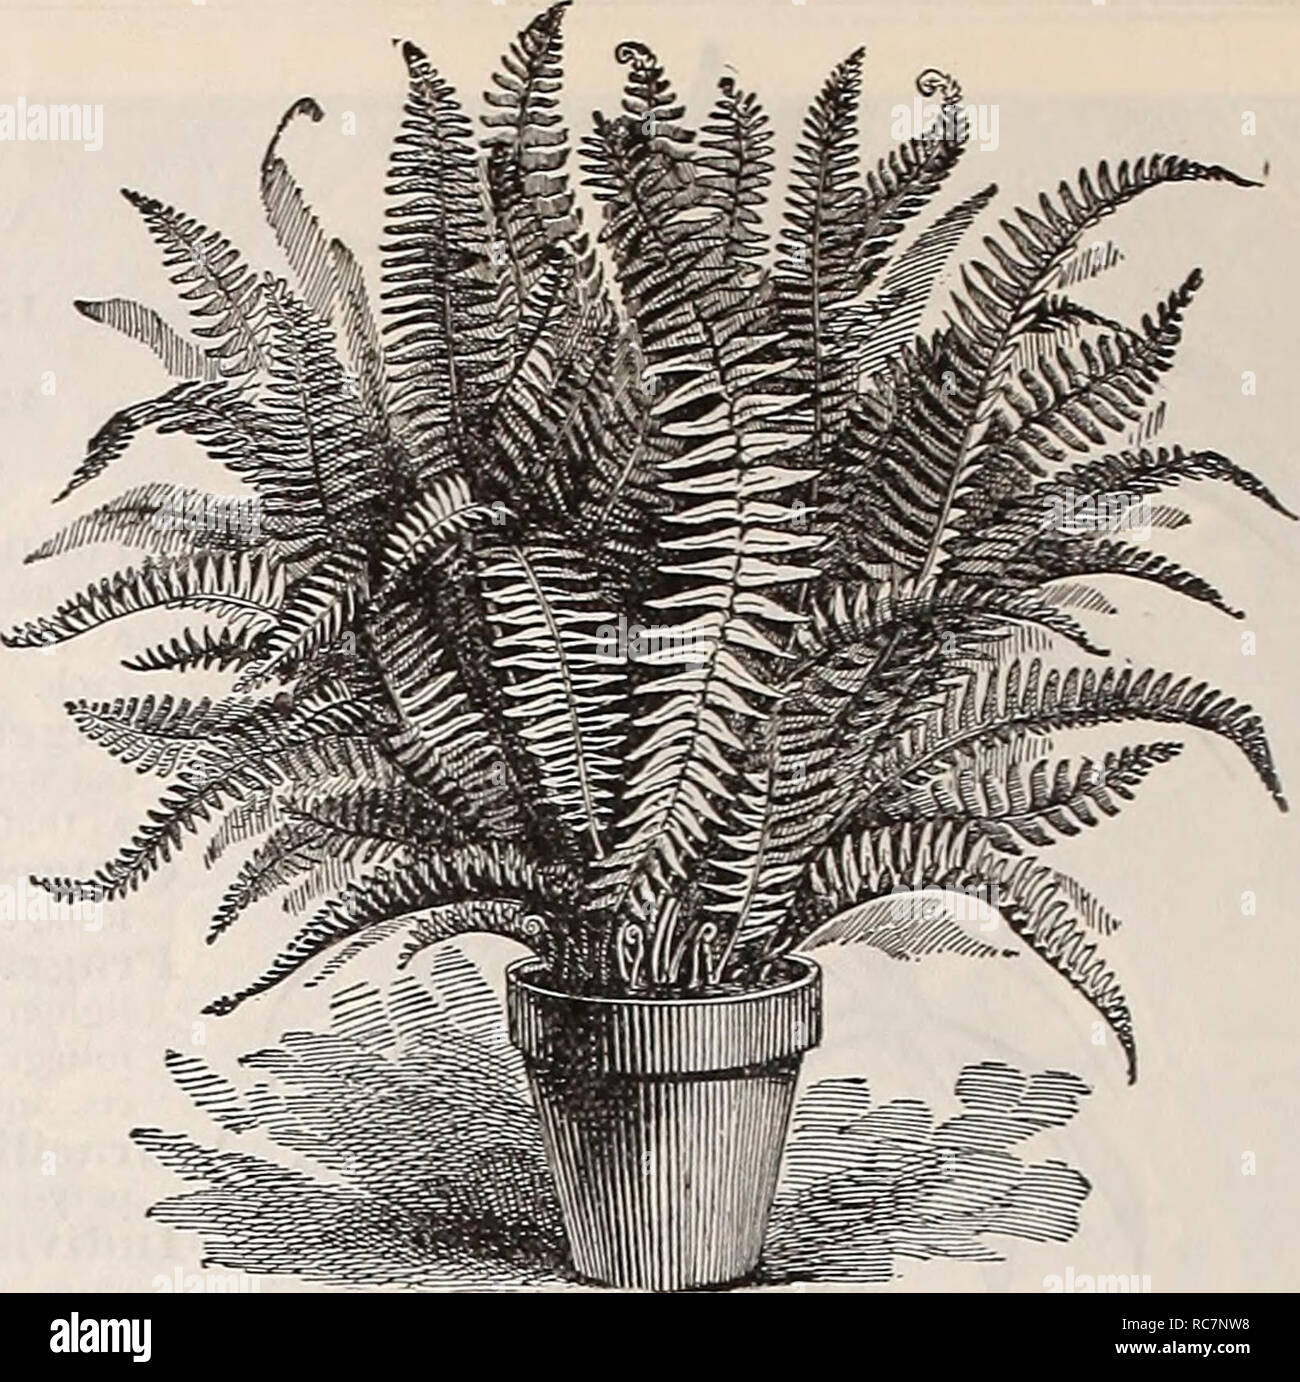 . Dreer's garden calendar : 1898. Seeds Catalogs; Nursery stock Catalogs; Gardening Catalogs; Flowers Seeds Catalogs; Vegetables Seeds Catalogs. 120 BEST PLANTS FOR GARDEN AND GREENHOUSE. NEW AND RARE FERNS. Aspleililim XidUS Avis {Bird's-nest Fern). We have now, foi' tlie first lime, a fine lot of this rare and interesting Fern. Good strong plants, $1.25 each. Nephrolepis Cordata Coiupacta. In our estimation this variety is the finest of all the Sword Ferns; il is of free, strong.growing compact habit, attaining when fully grown a height of about 2 feet. The fronds are of a dark green color,  Stock Photo